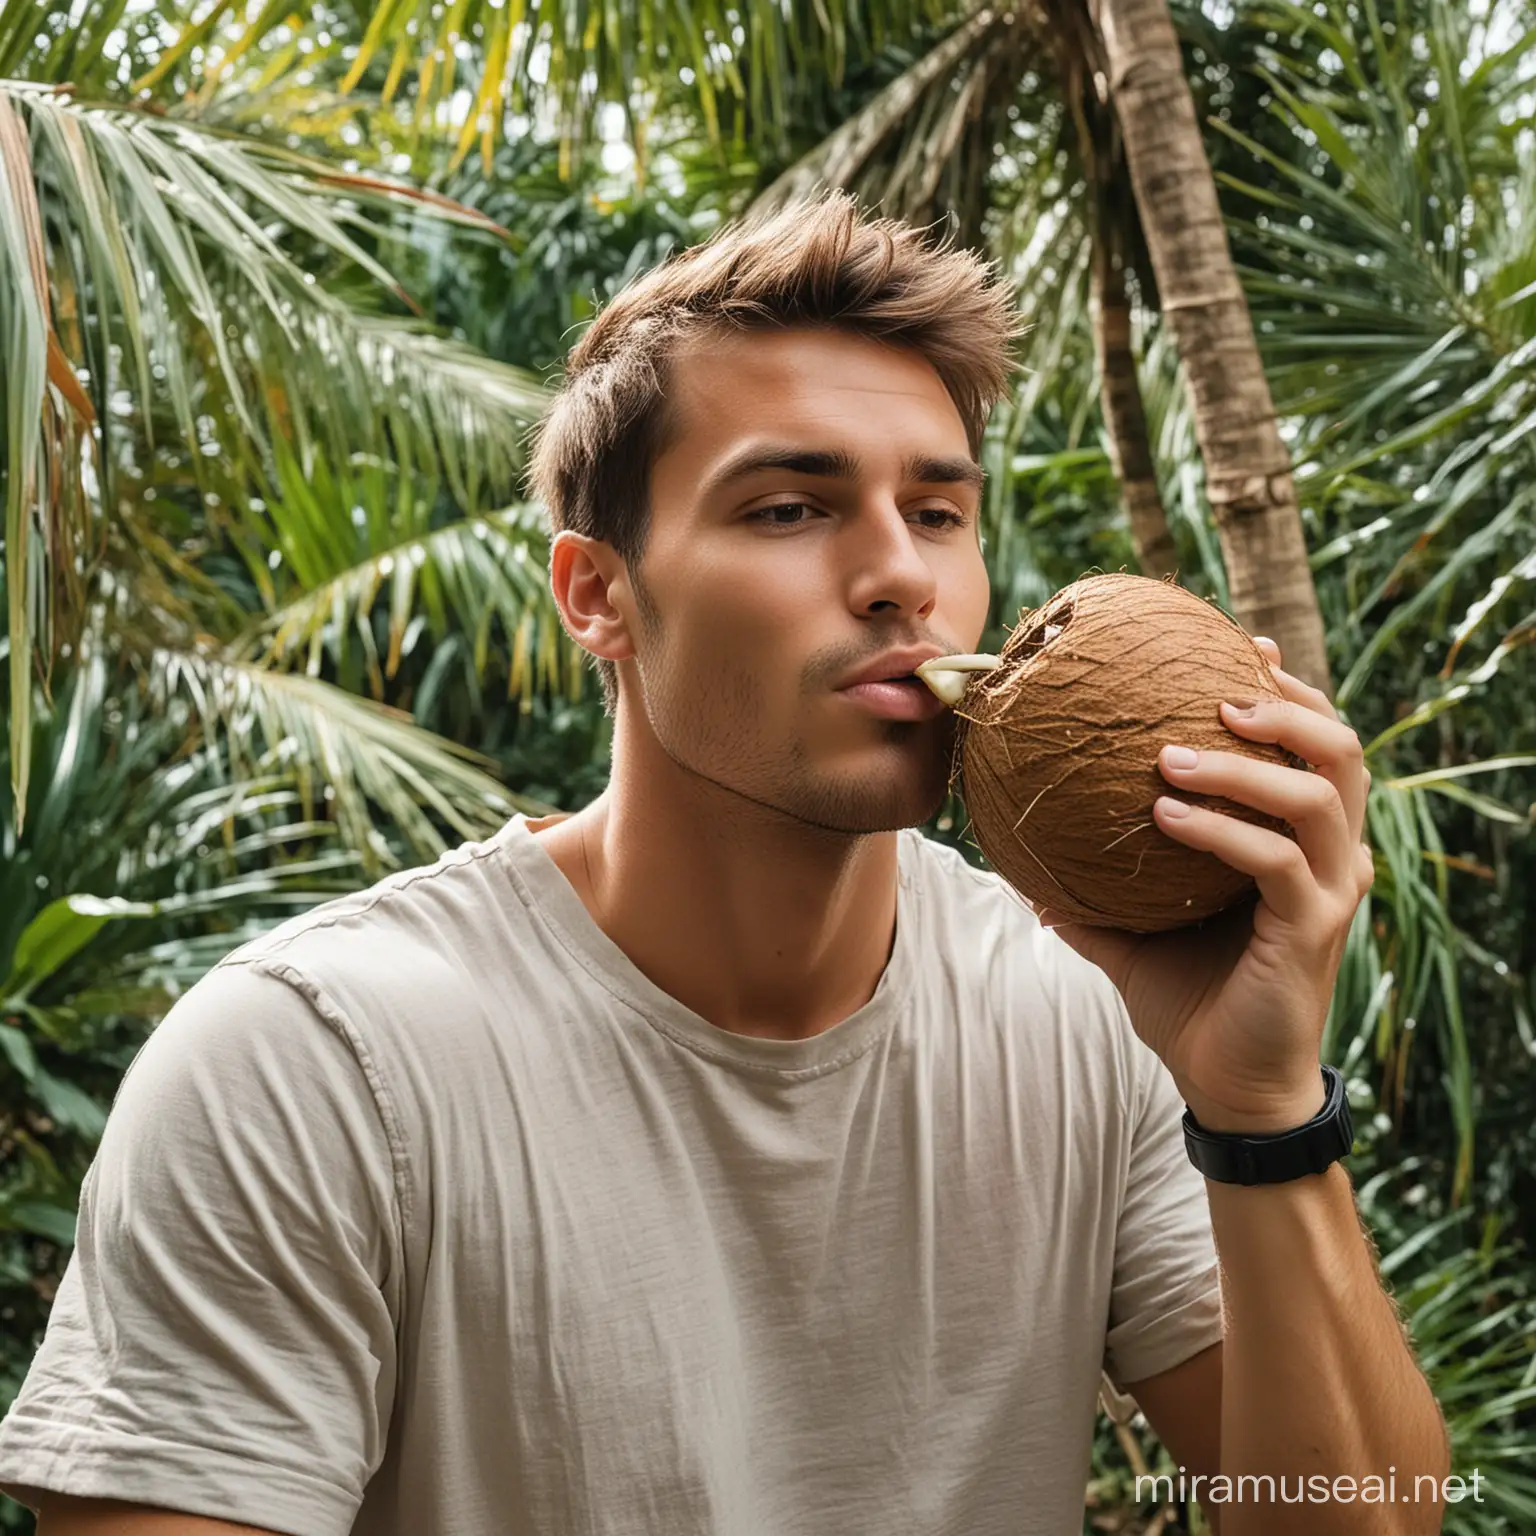 A millennial man, he has brown hair, he is in the jungle, he drinks from a coconut, he is stress-free